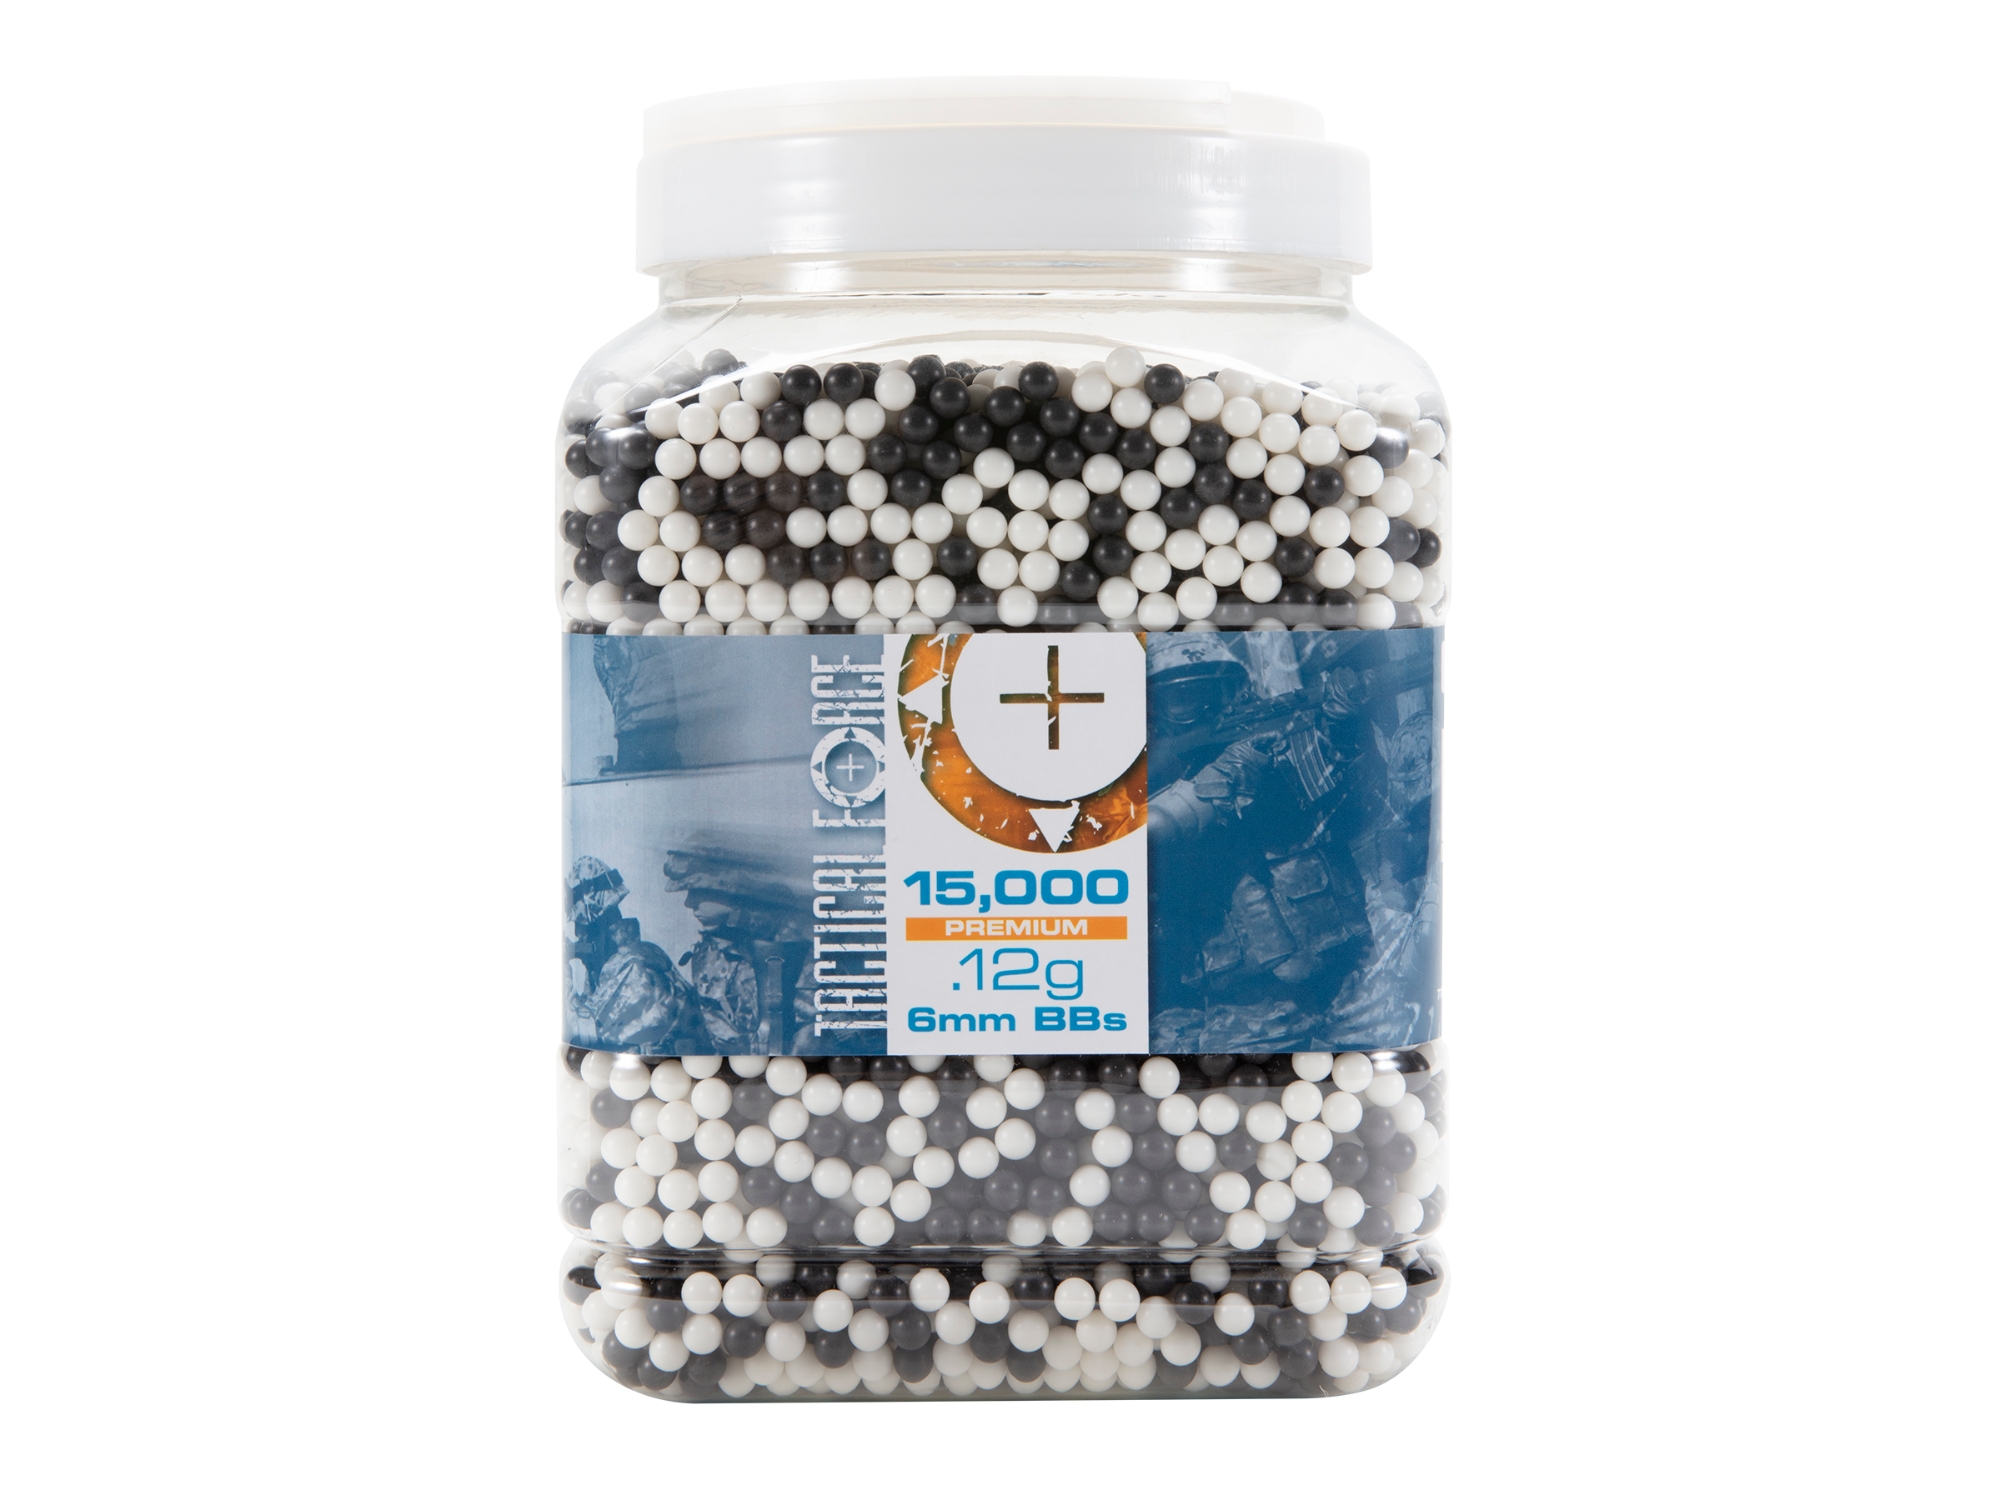 Elite Force 15,000 Tactical Force Airsoft BBs .12g White/black, 6mm